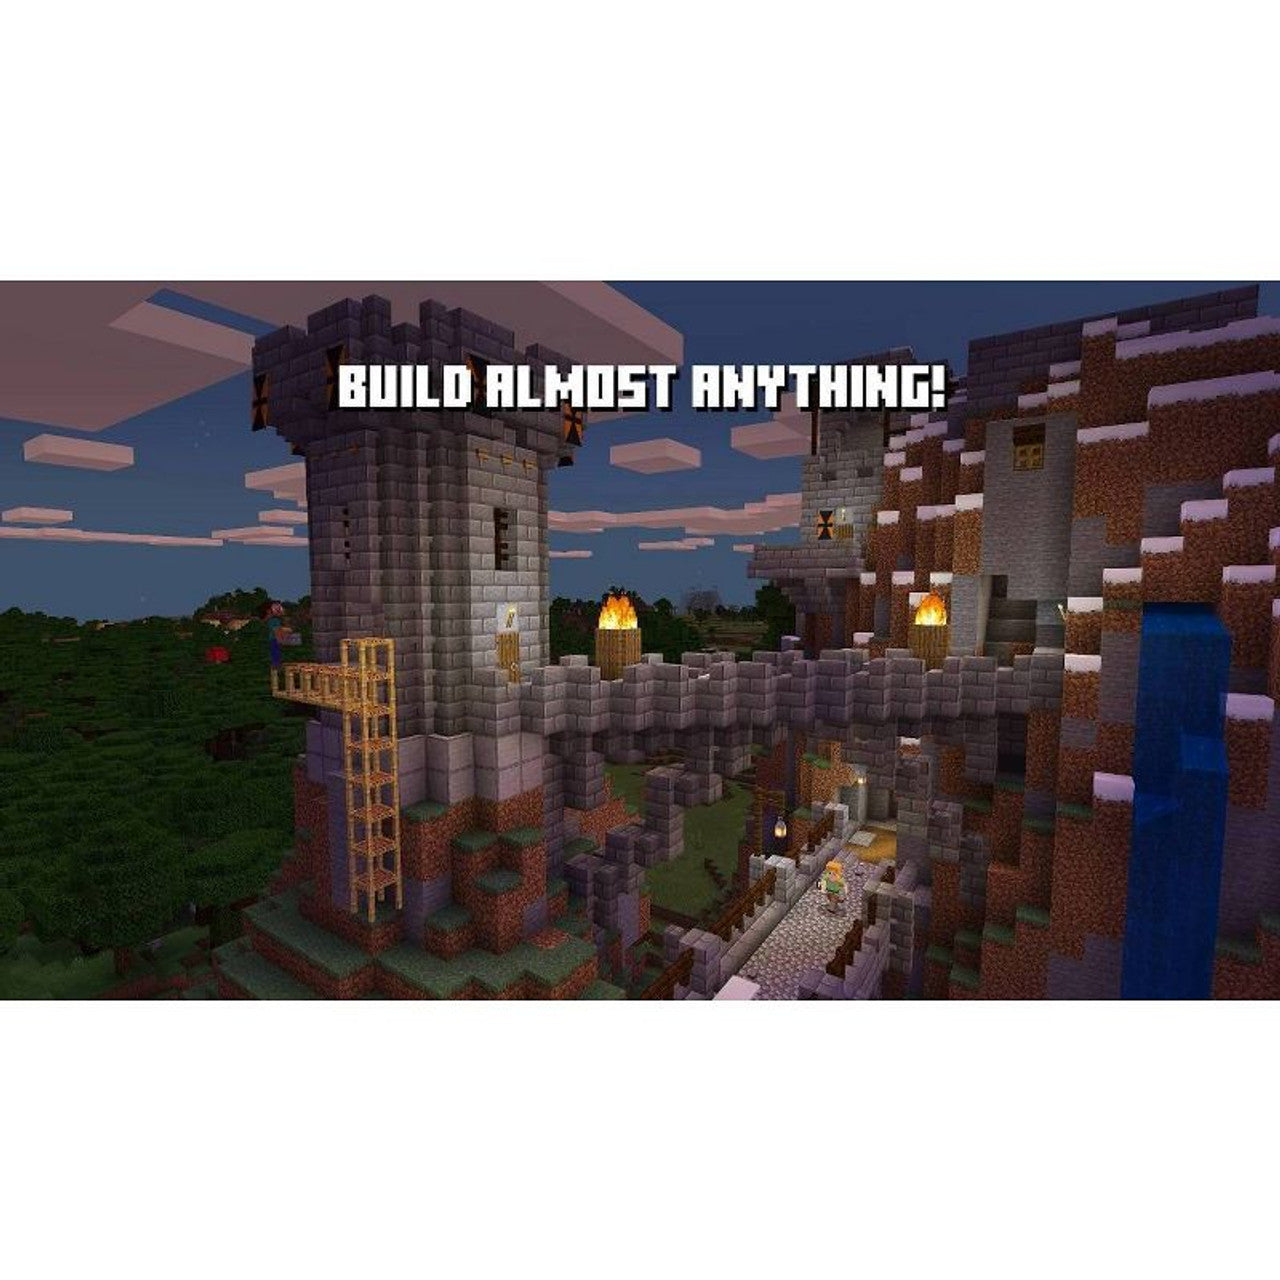 Product Image : This is brand new.<br>Minecraft is a game about placing blocks and going on adventures.

Explore randomly generated worlds and build amazing things from the simplest of homes to the grandest of castles. Play in creative mode with unlimited resources or mine deep into the world in survival mode, crafting weapons and armor to fend off the dangerous mobs.

Minecraft is a game about placing blocks and going on adventures
Explore randomly generated worlds and build amazing things from the simples